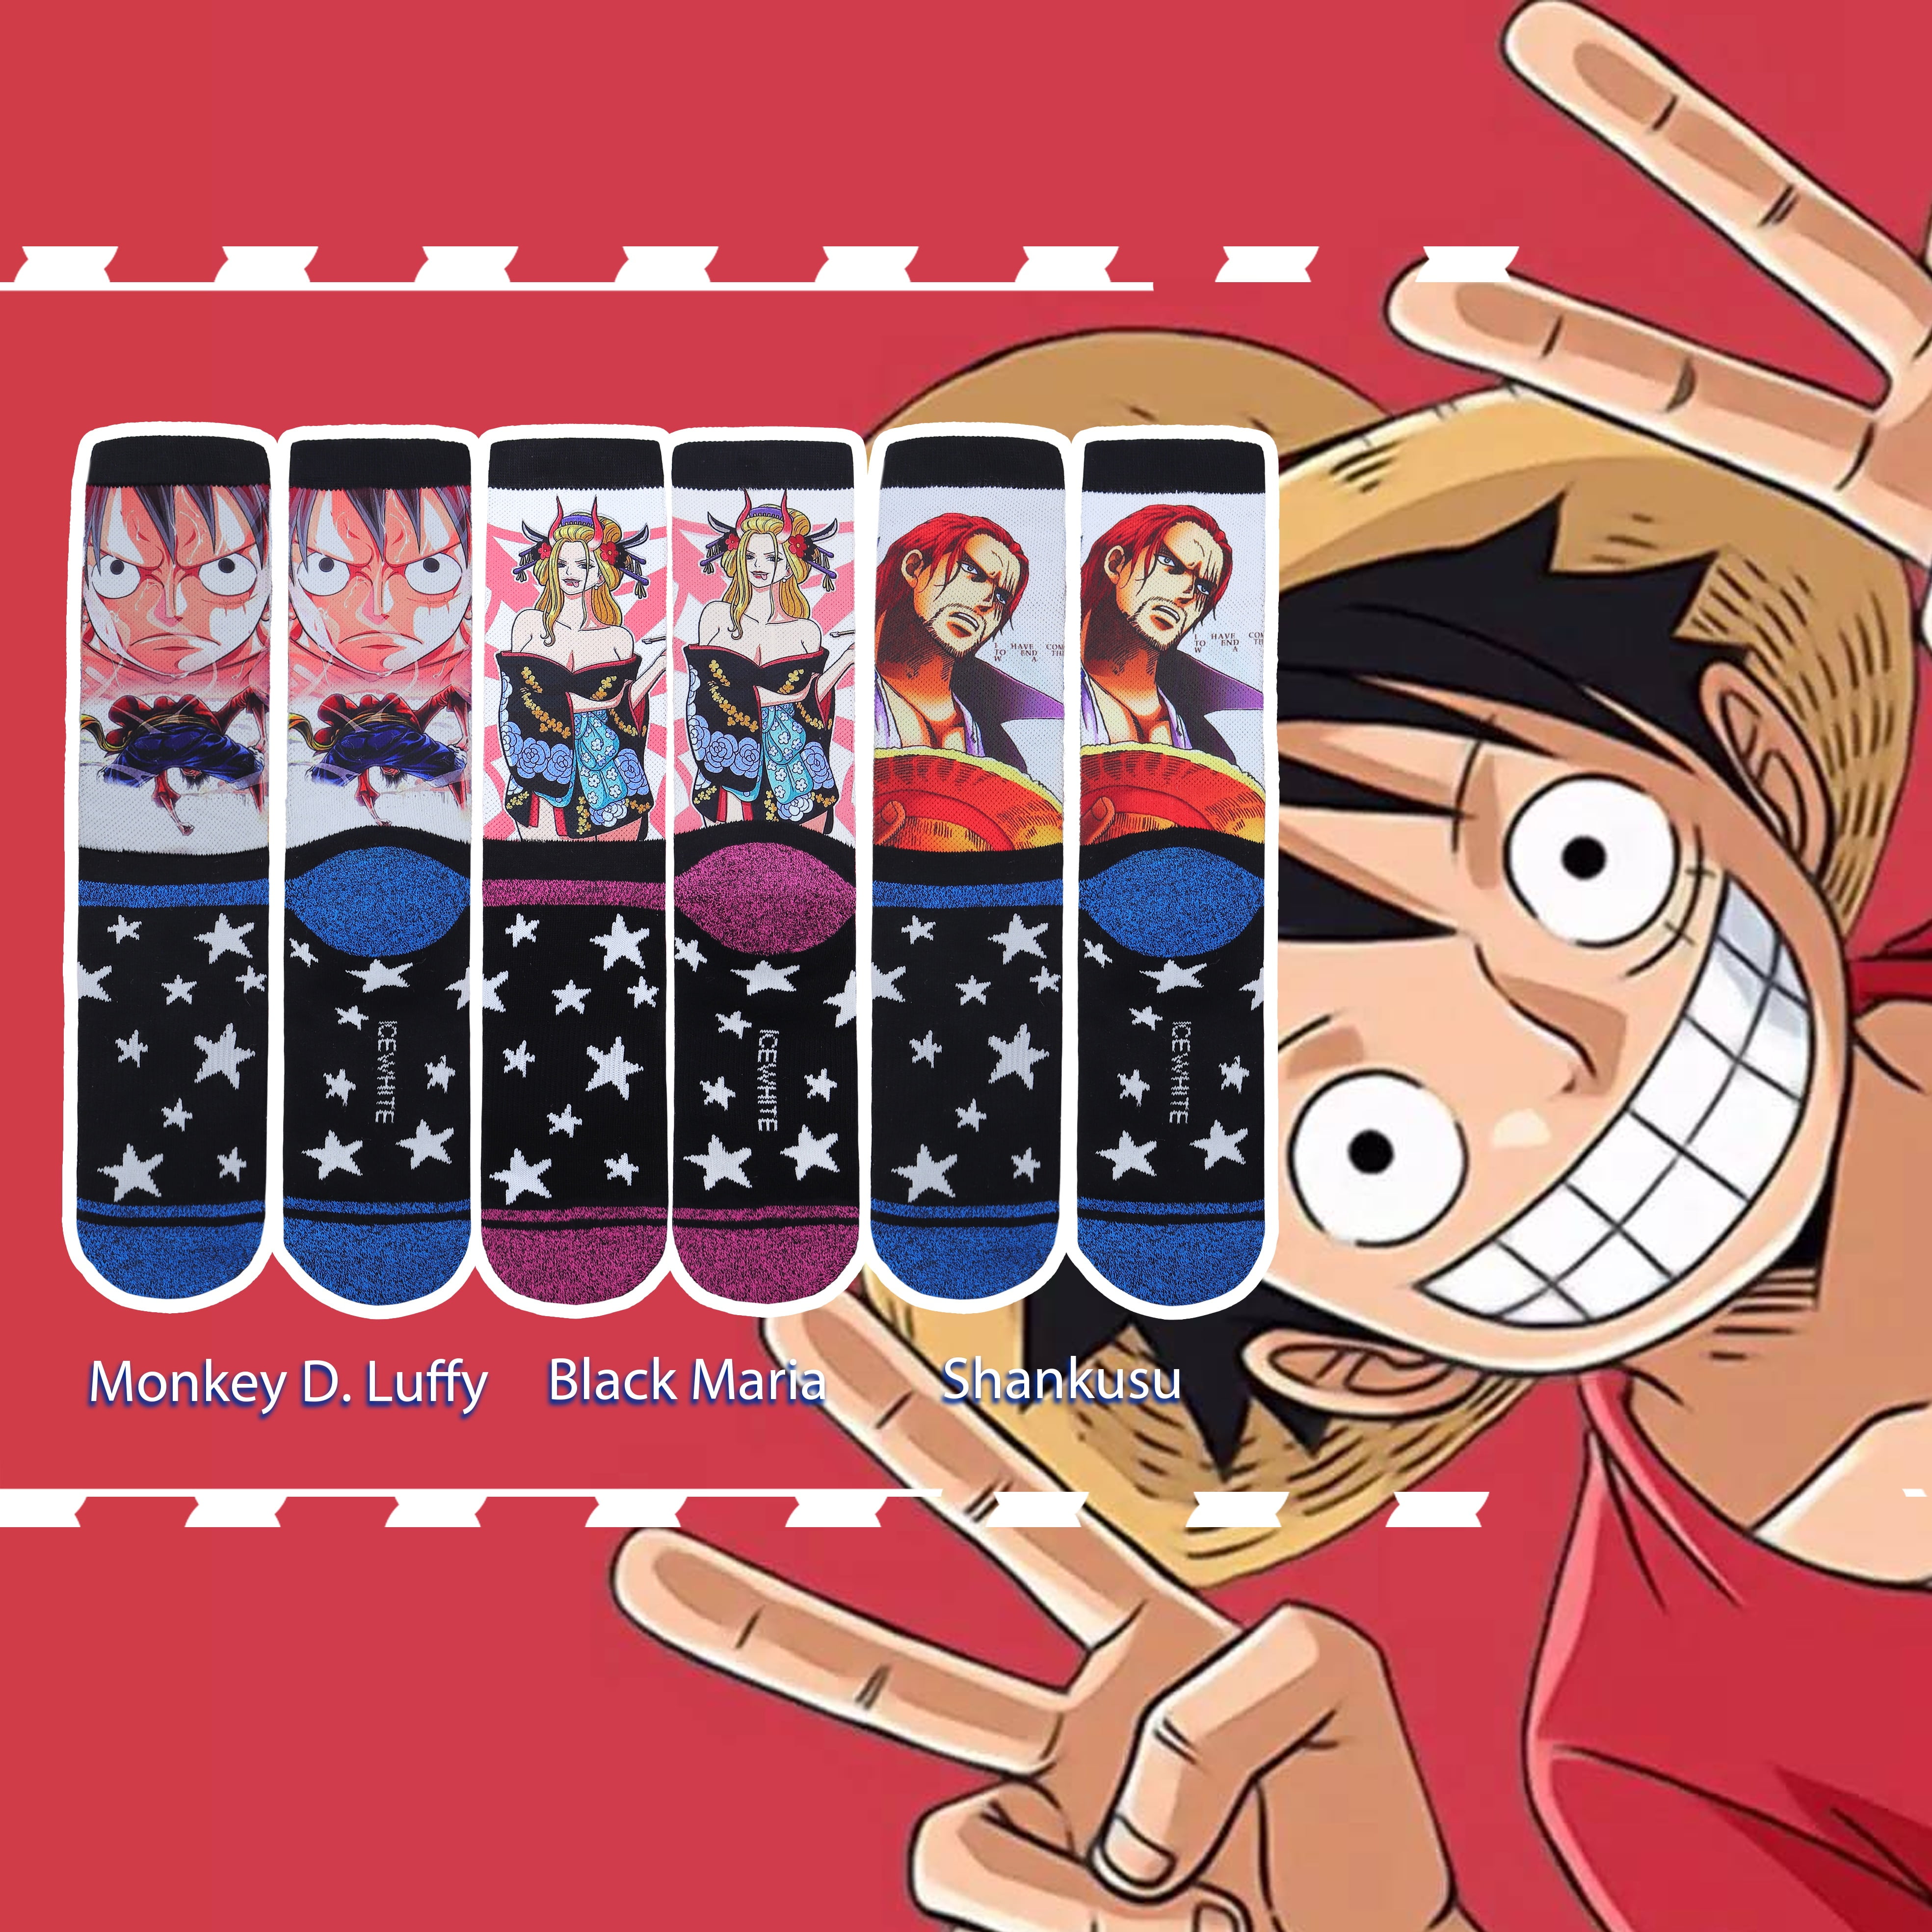 Roffatide One Piece Socks 3 Pack, Anime Patterned Colorful Stretch